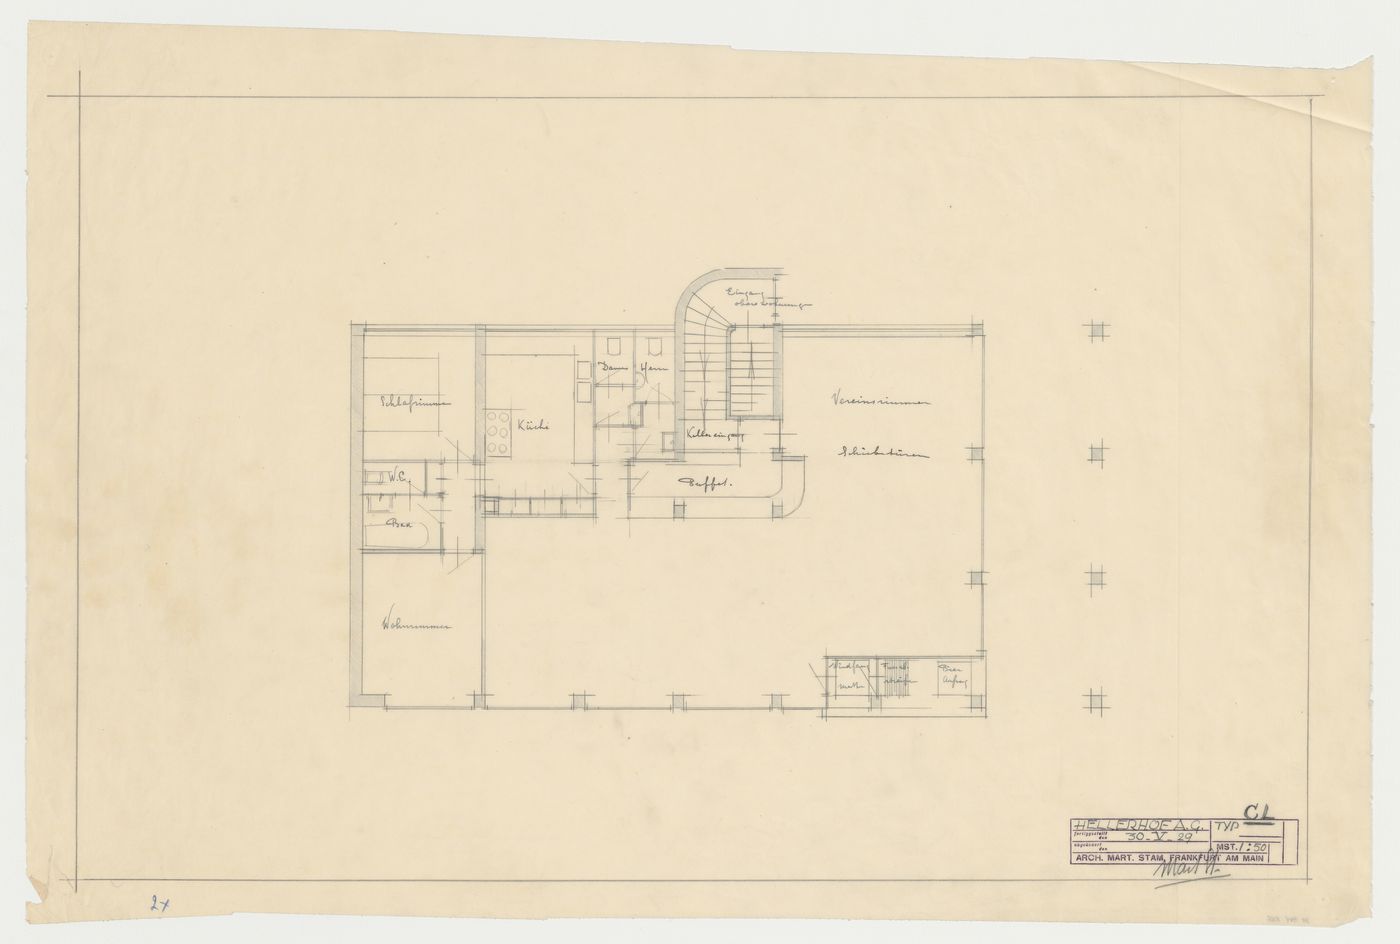 Ground floor plan for a type CL housing unit, Frankfurt am Main, Germany